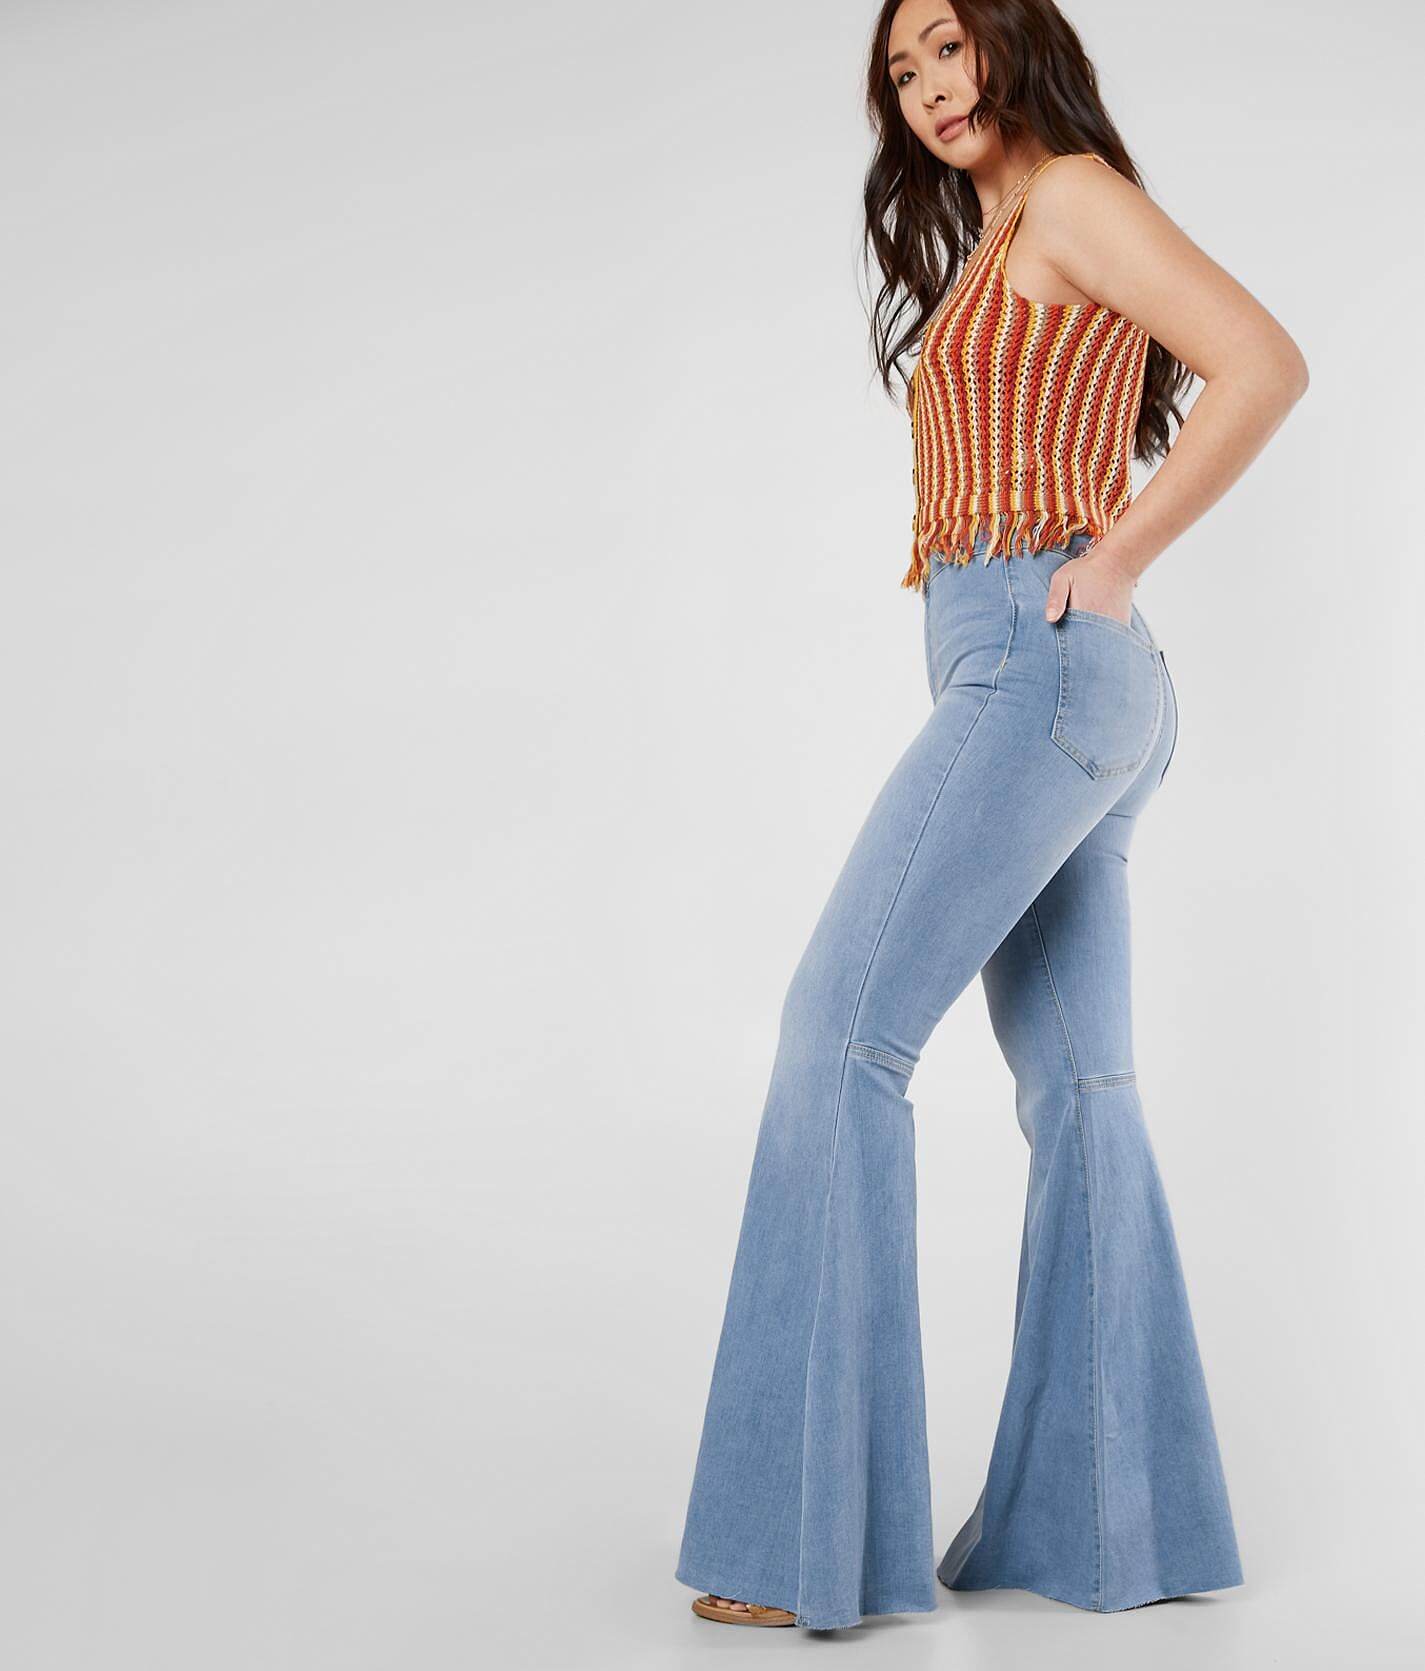 just float on flare jeans free people